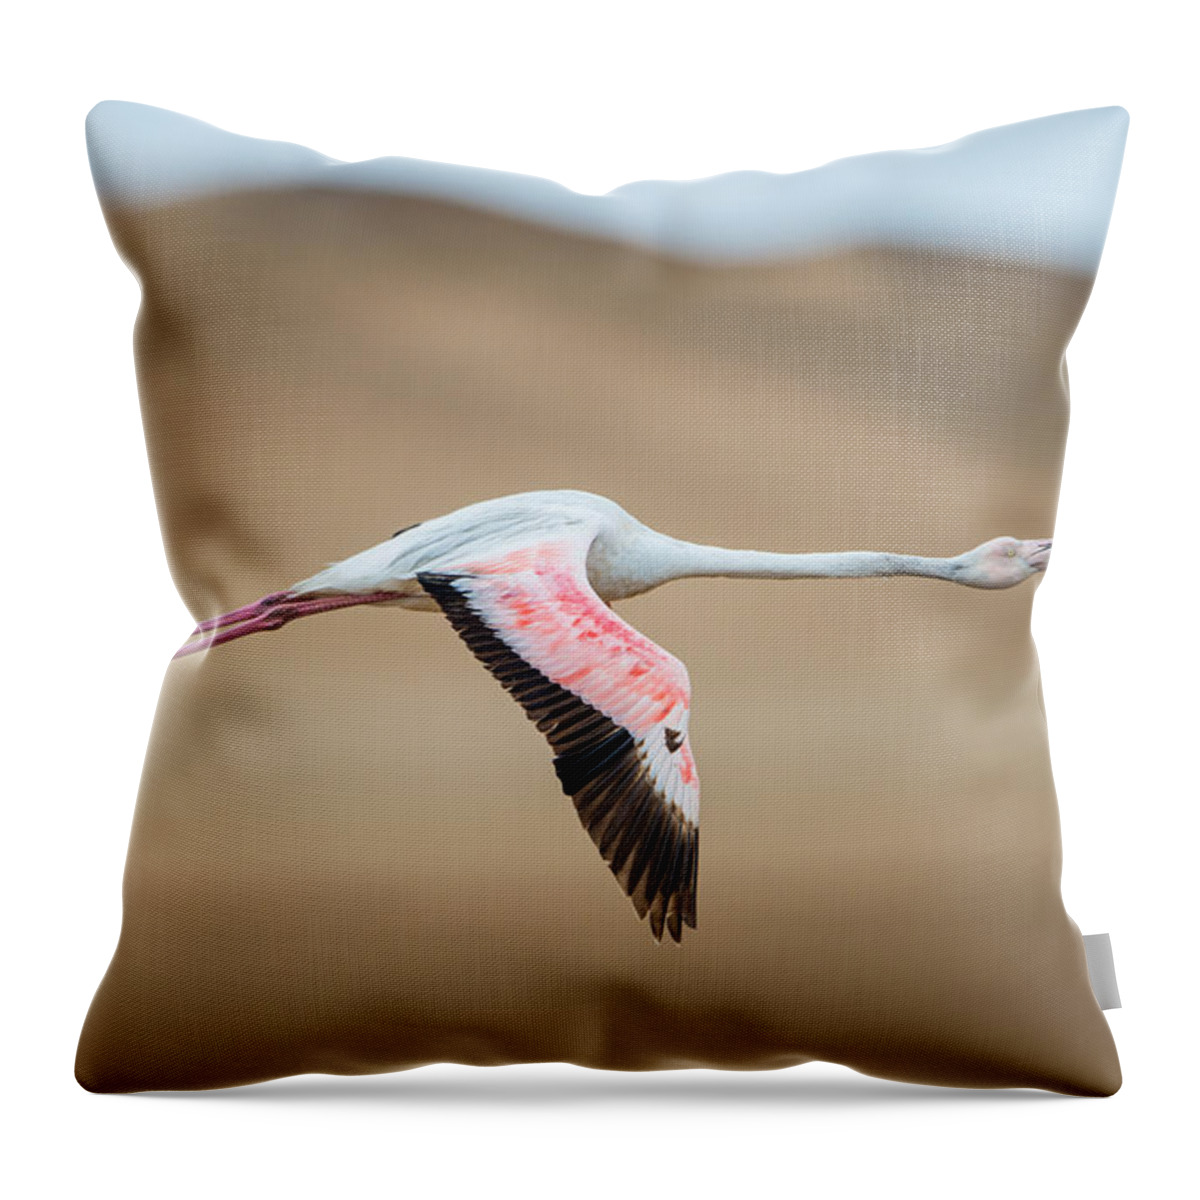 Photography Throw Pillow featuring the photograph Greater Flamingo Phoenicopterus Roseus #2 by Panoramic Images